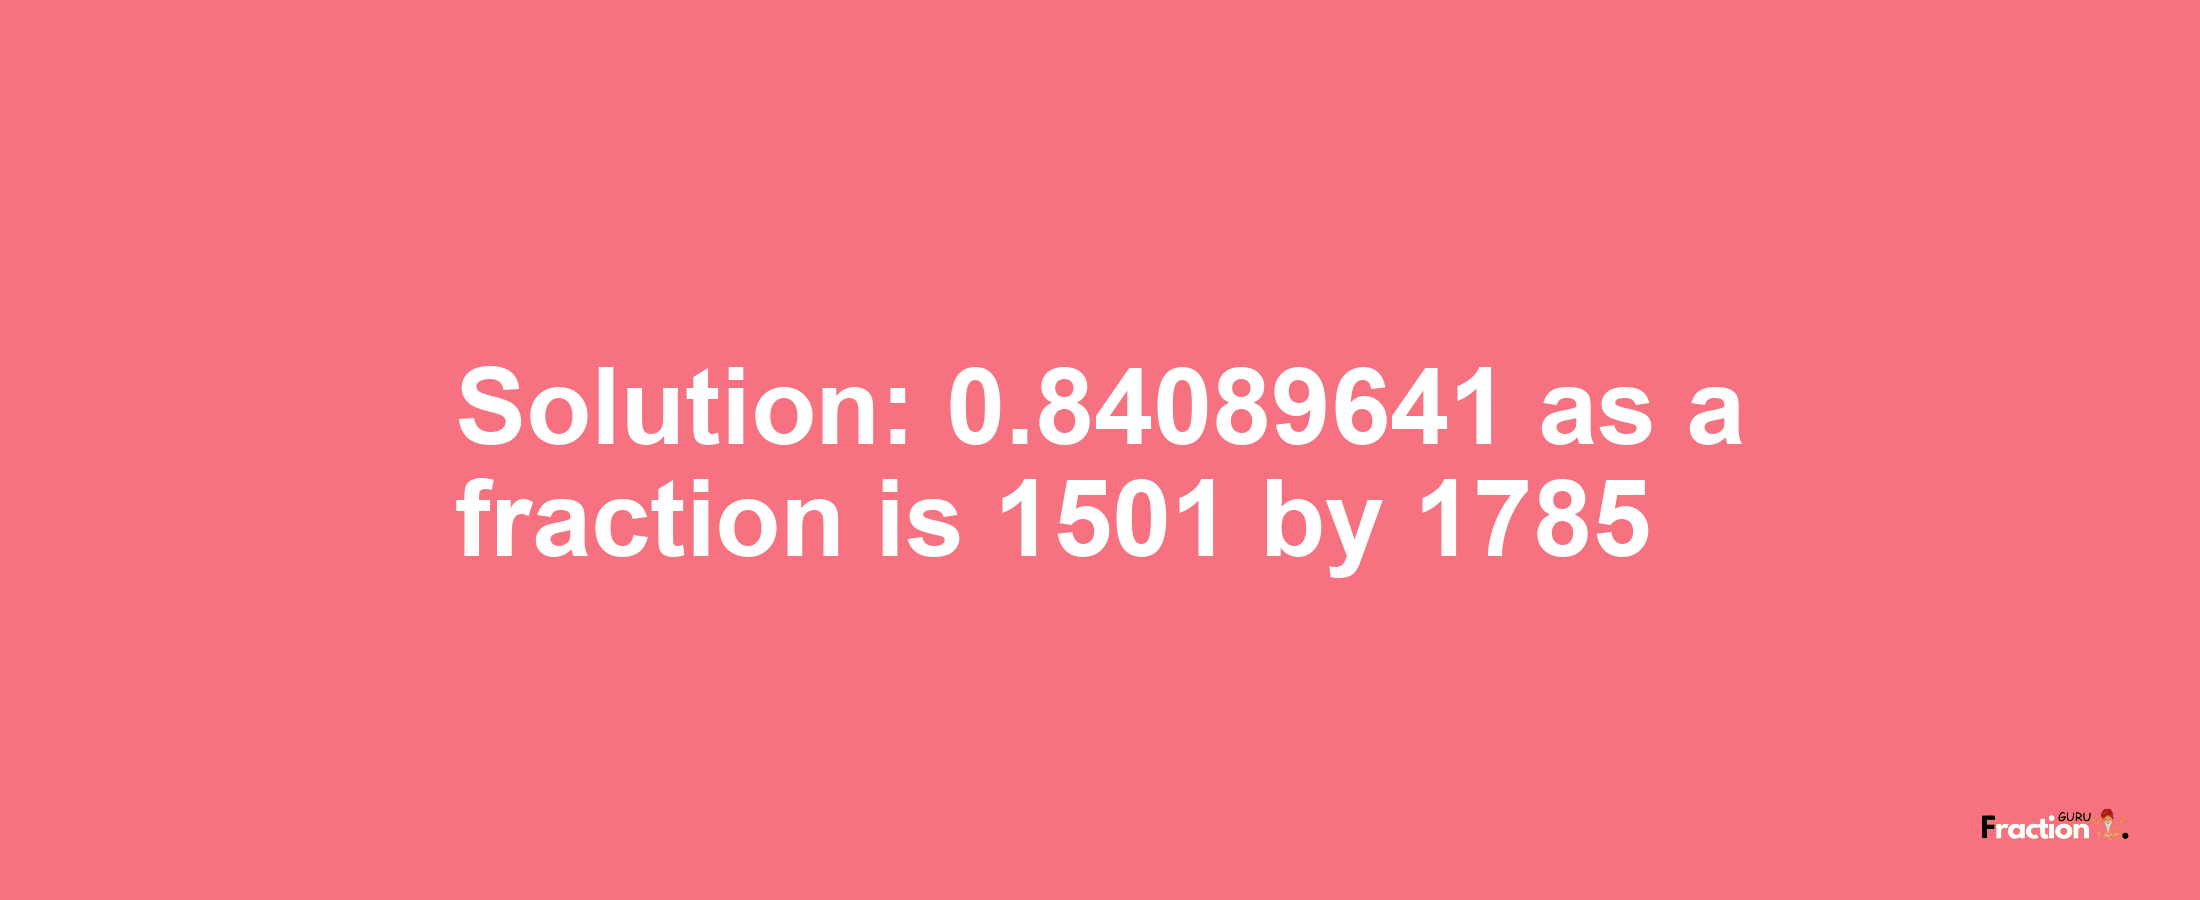 Solution:0.84089641 as a fraction is 1501/1785